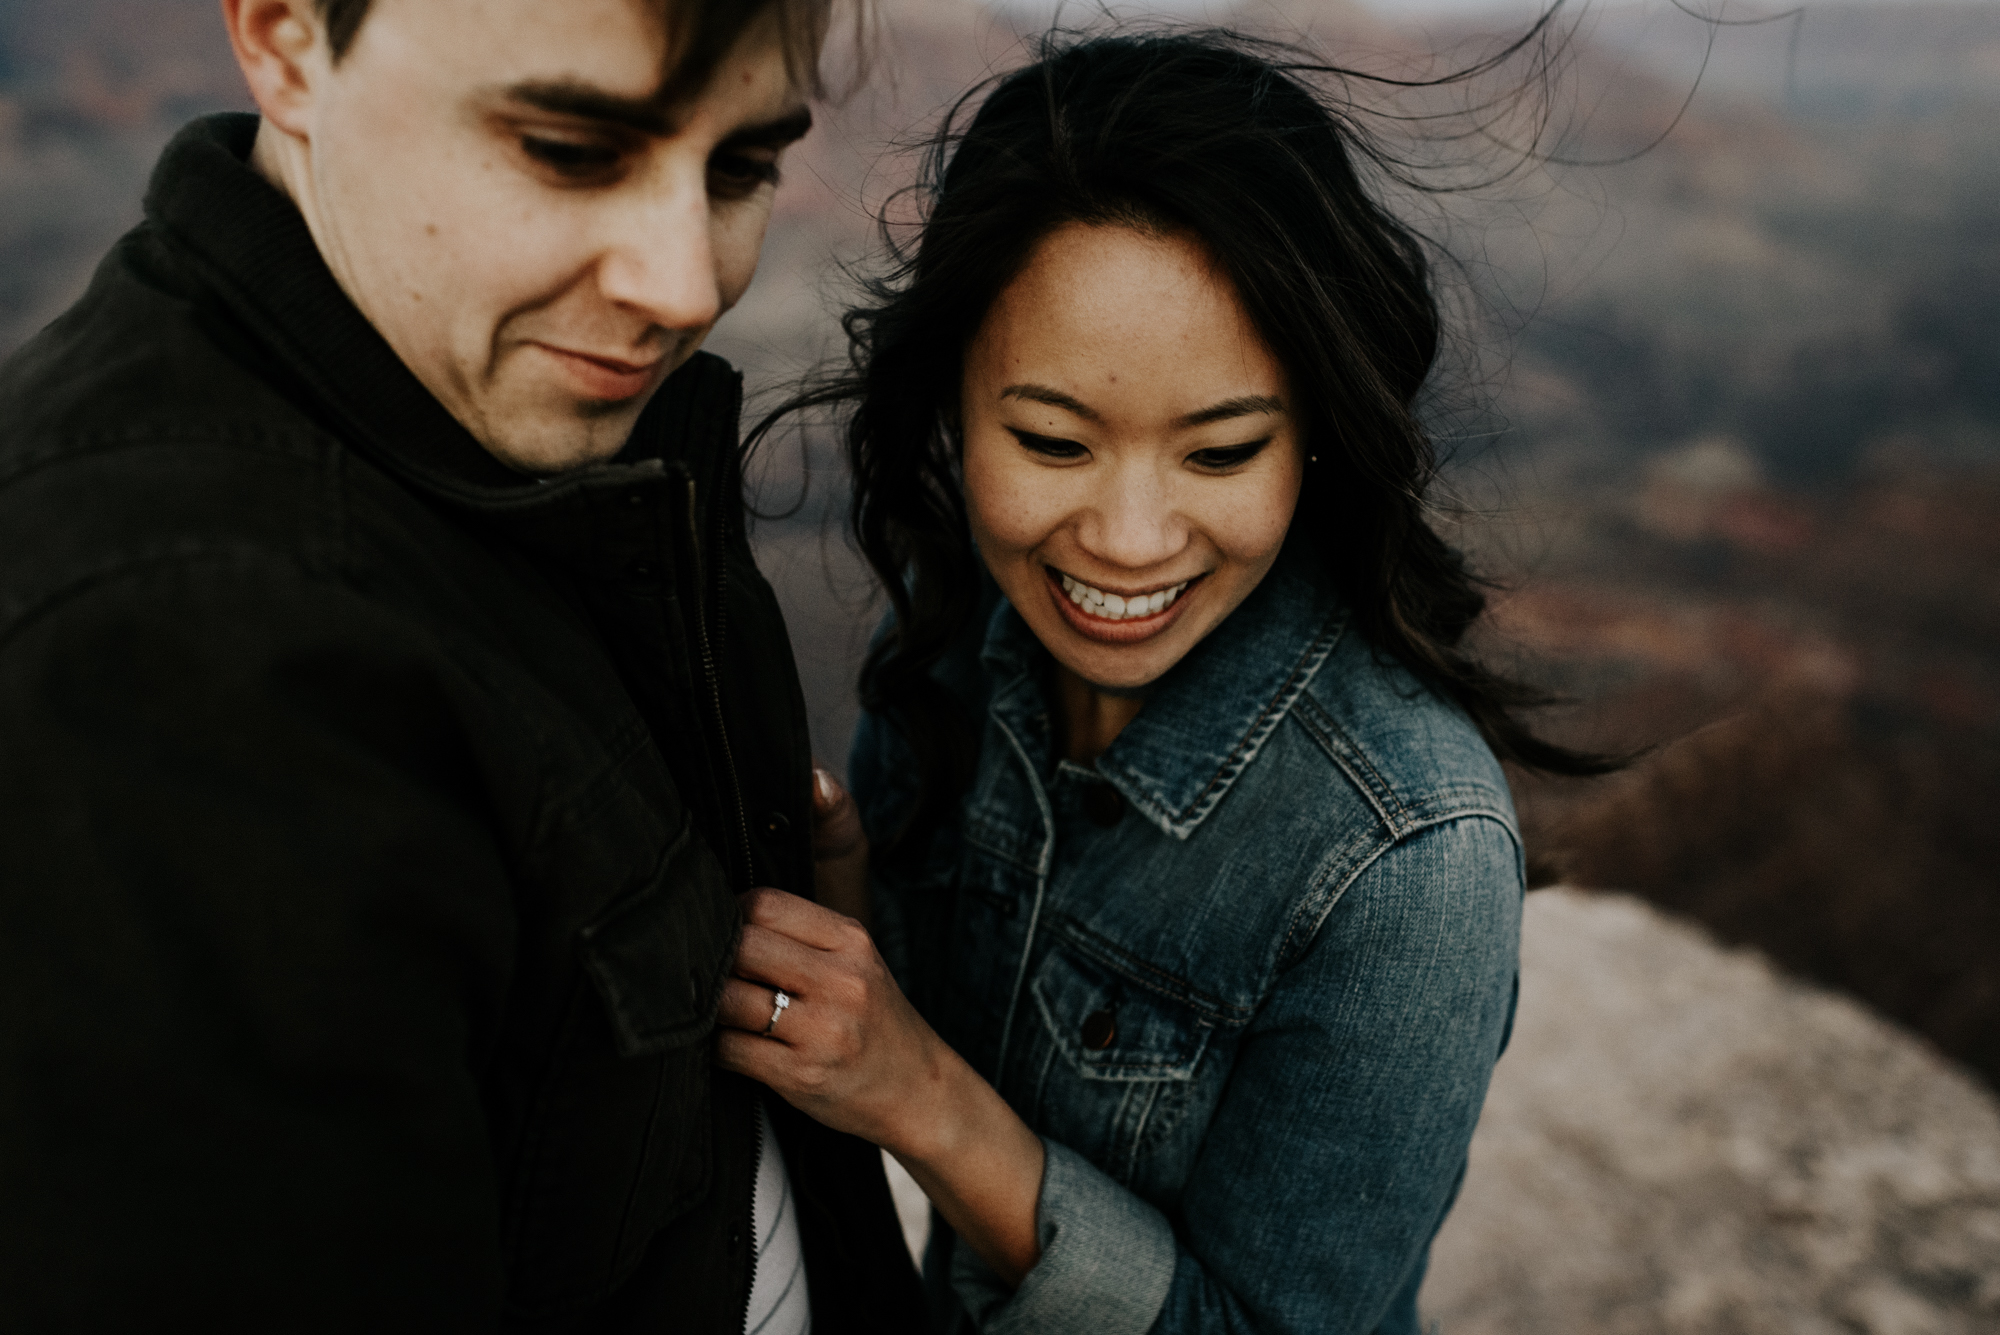 Couples Adventure Photography, Adventure Engagement Session at Grand Canyon National Park